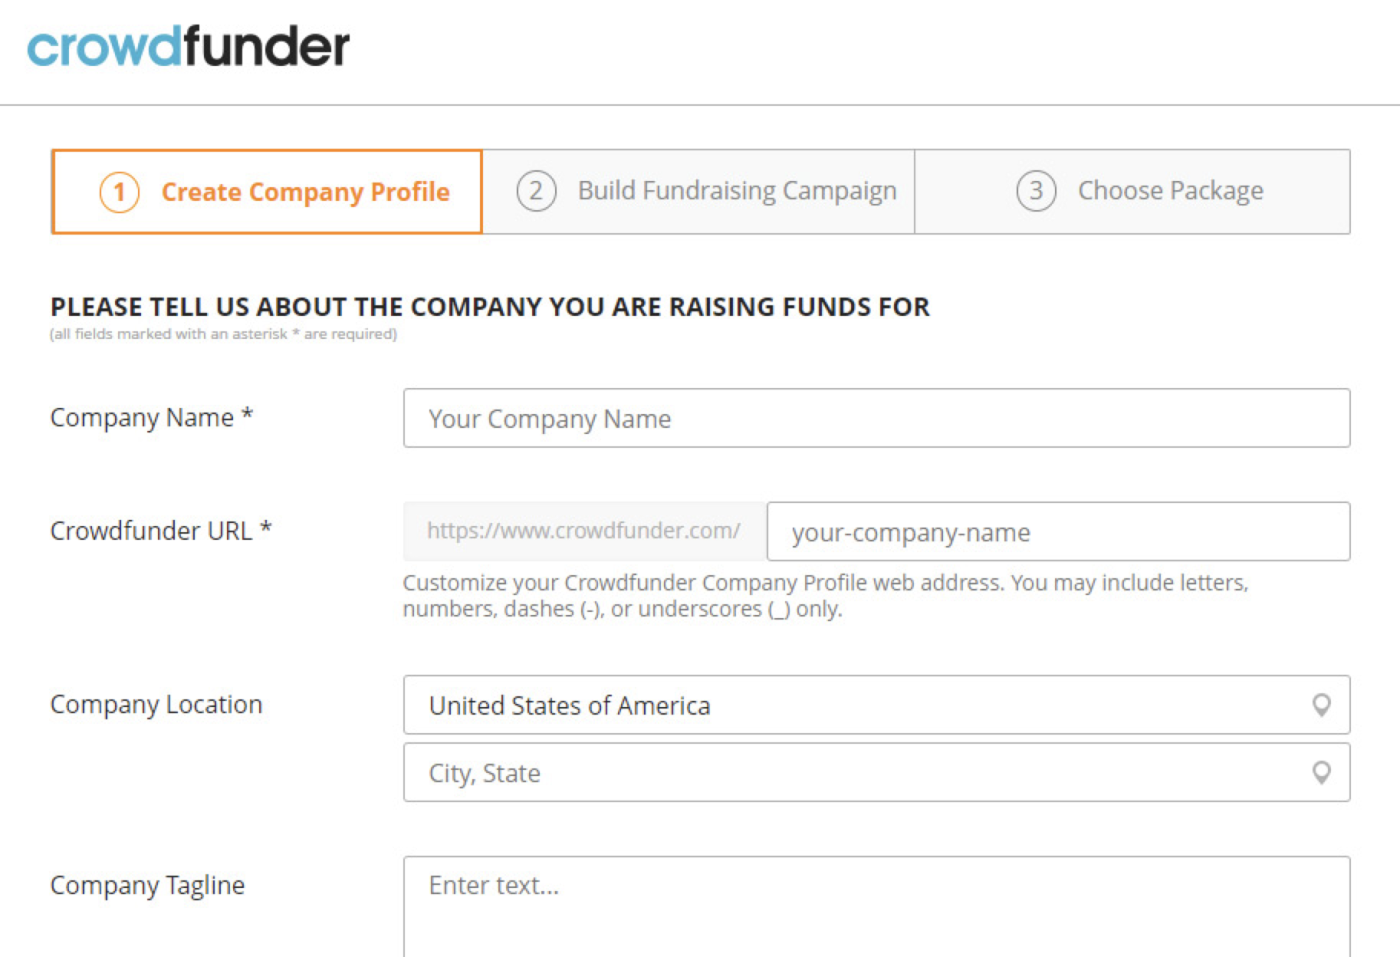 Getting started with Crowdfunder